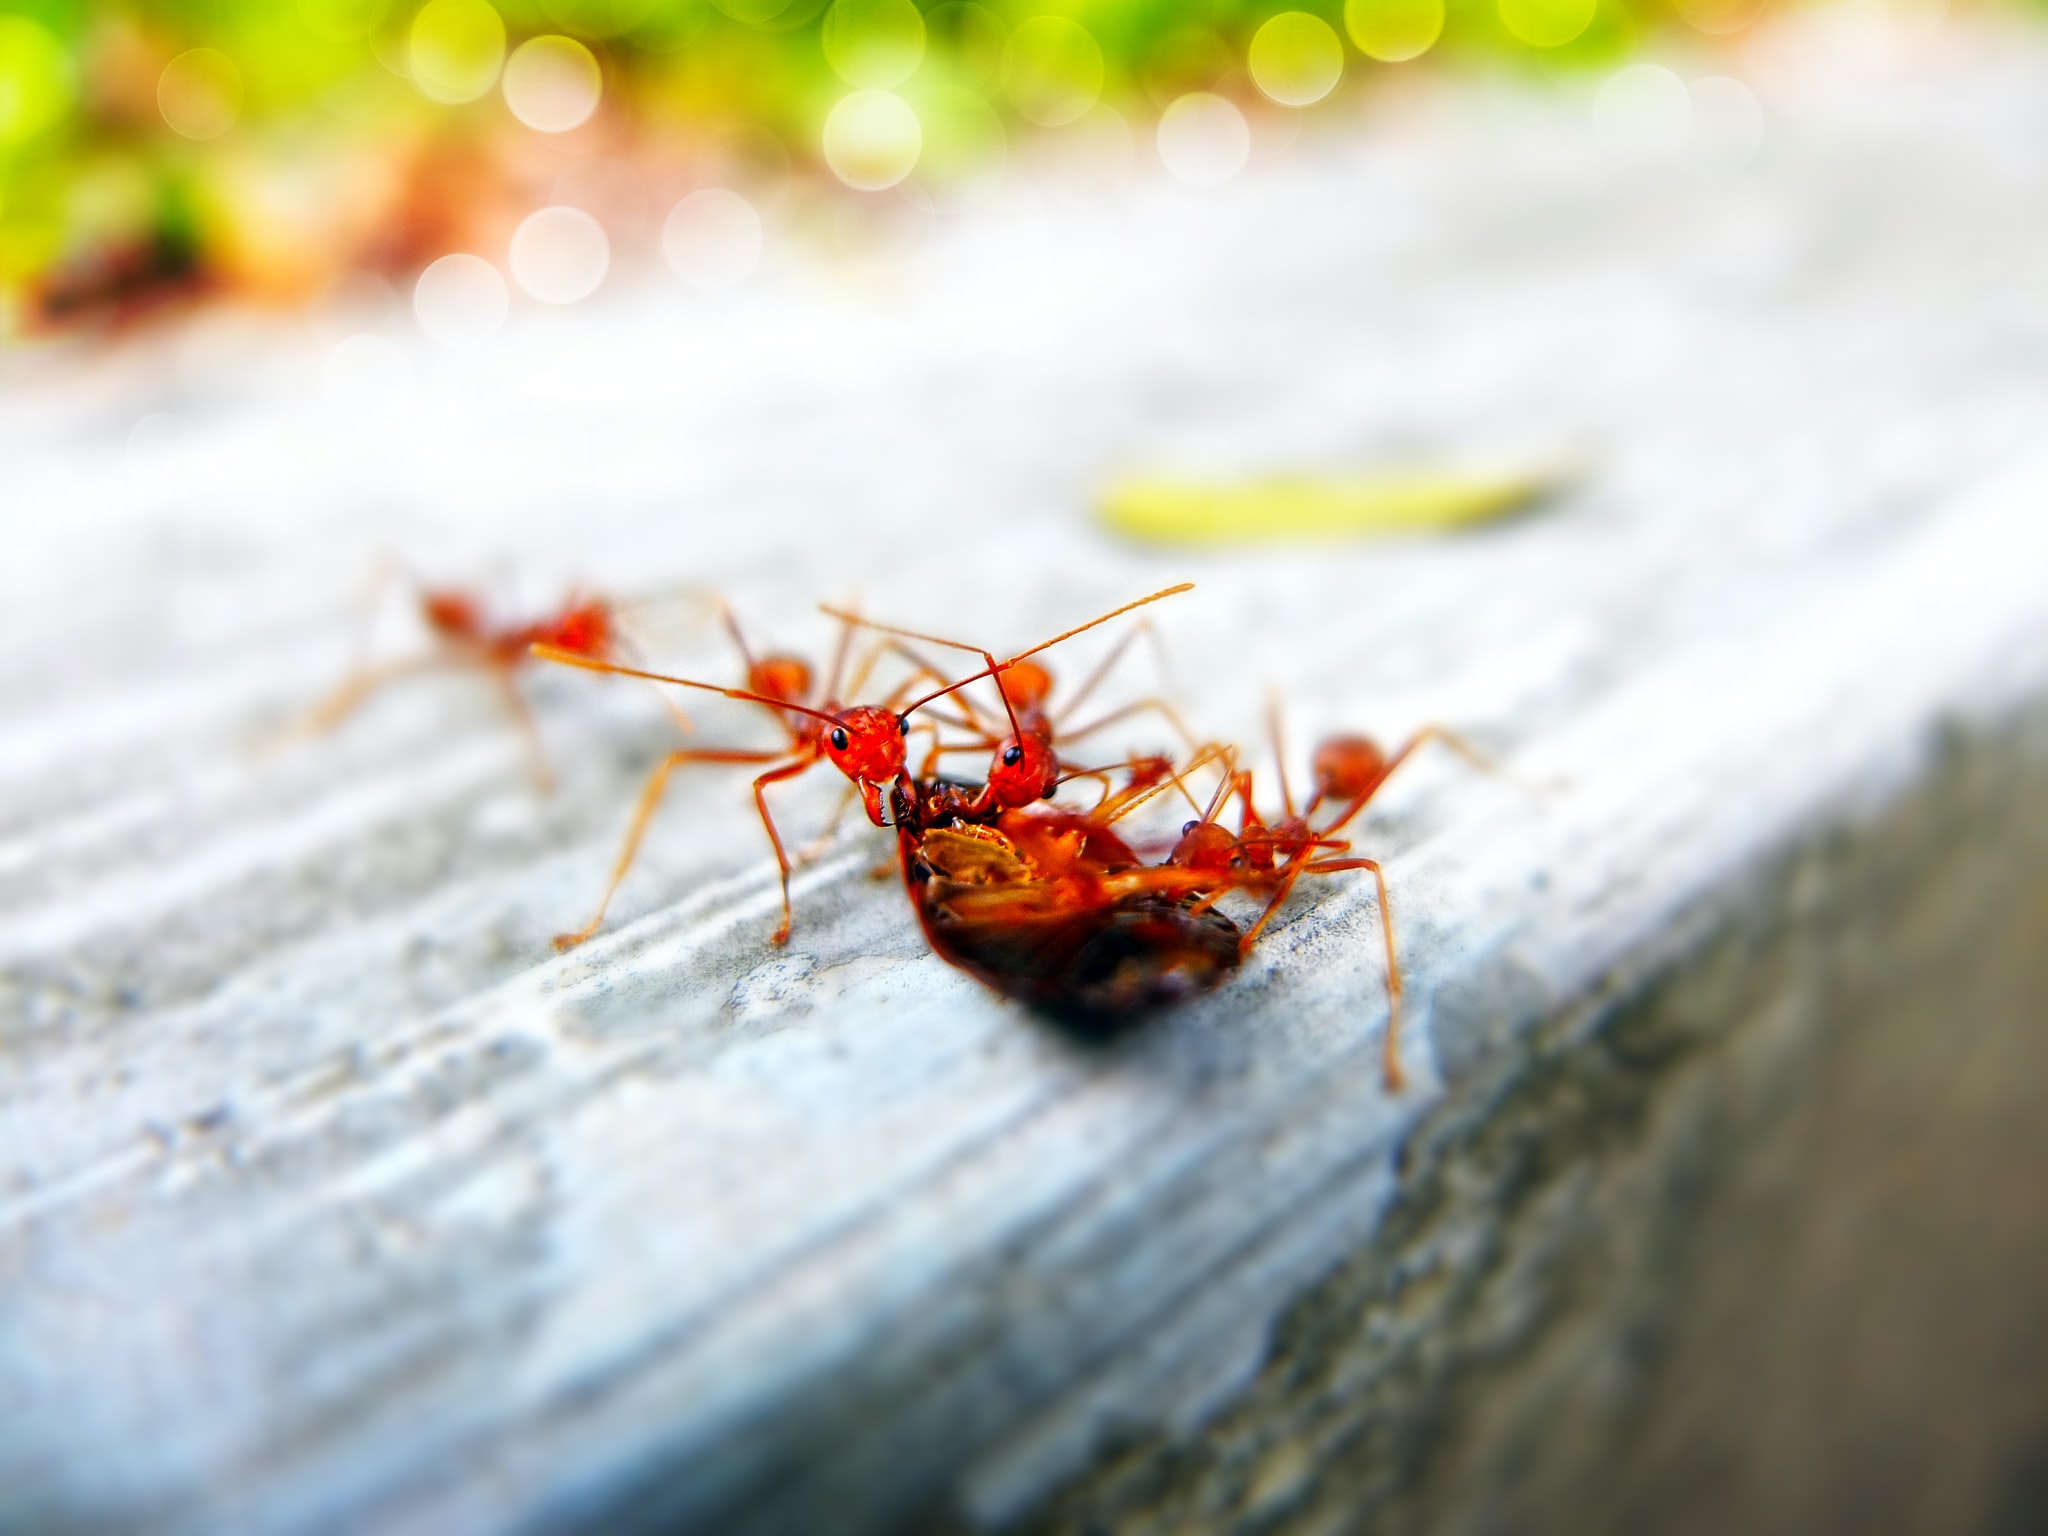 Ant Infestation in your home